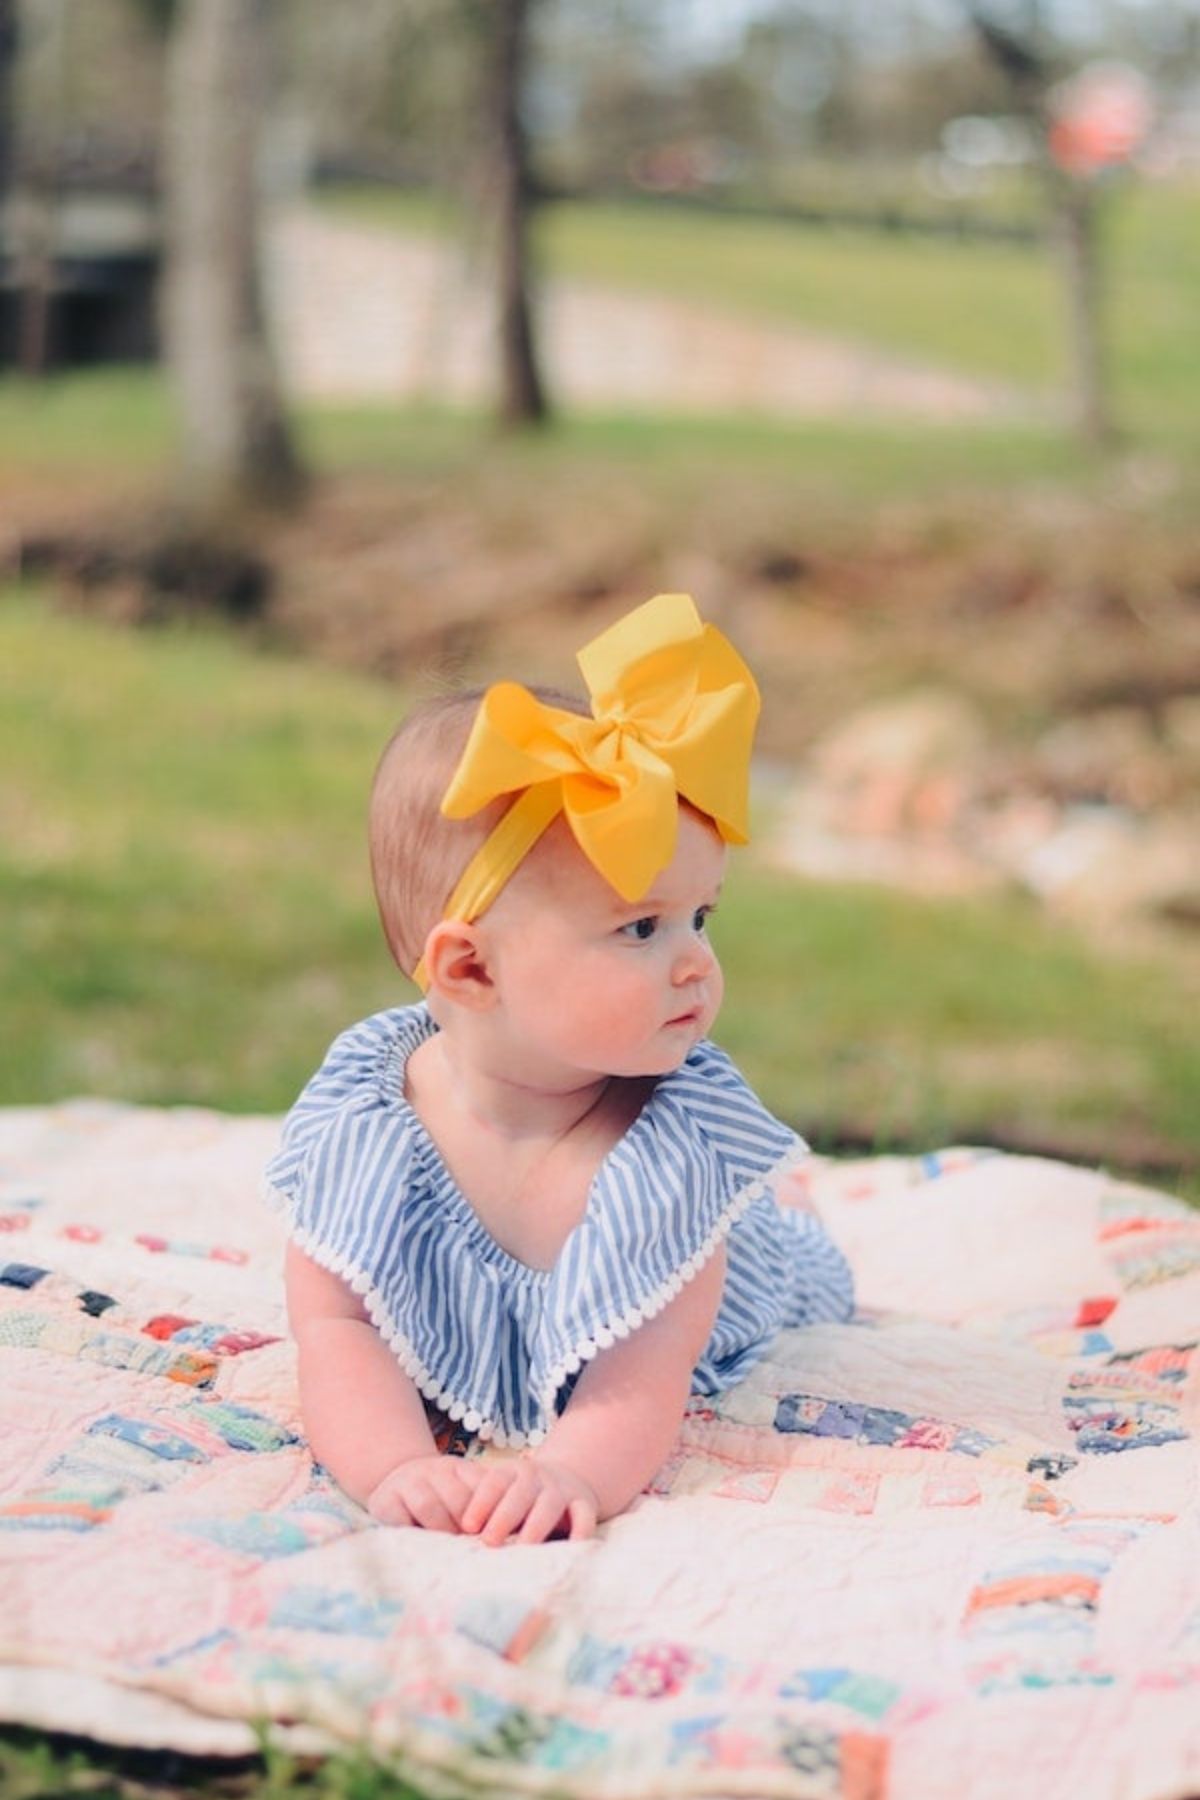 Baby girl with yellow large yellow bow and striped outfit lays on a blanket outside.